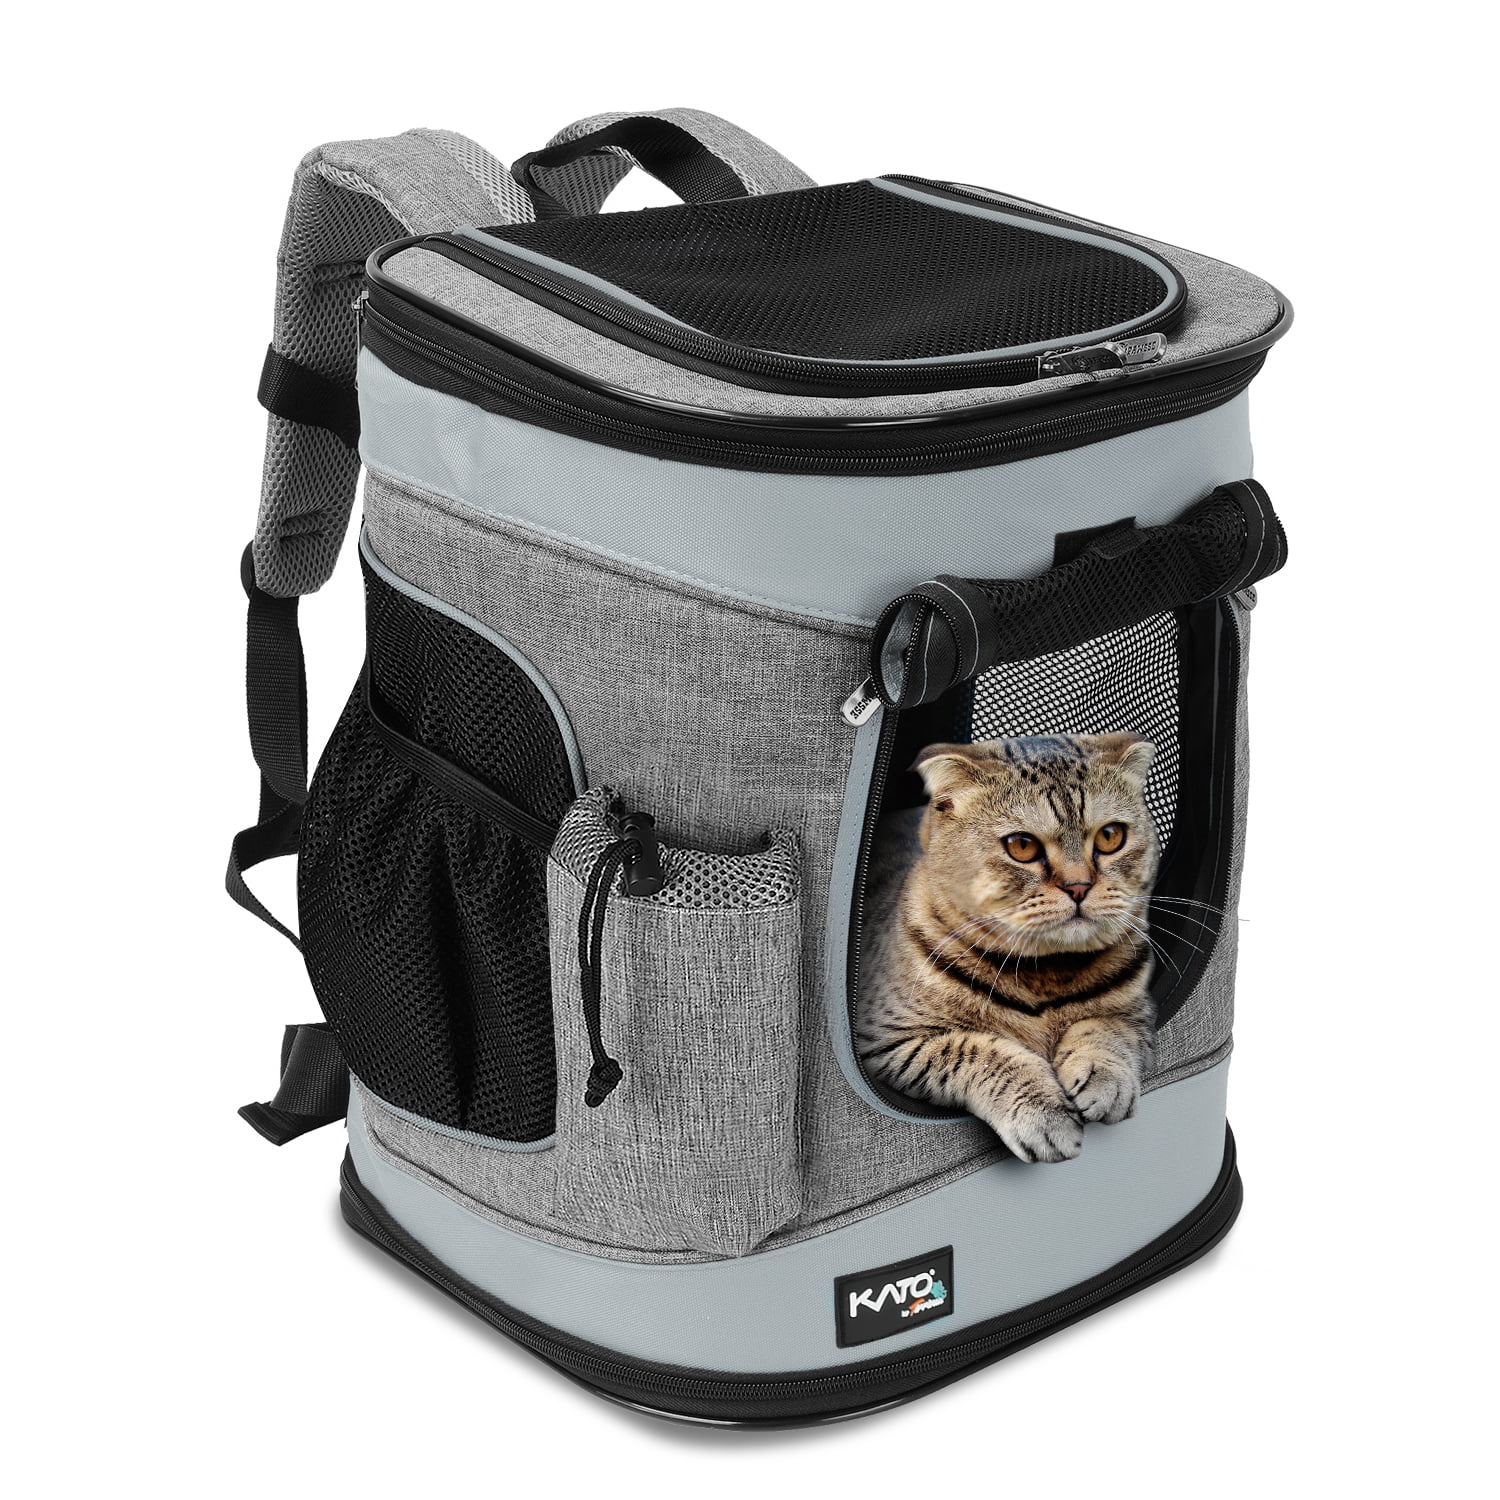 OPENROAD Deluxe Pet Carrier Backpack for Small Cats and Dogs Outdoor Use Ventilated Design Two-Sided Entry Safety Features and Cushion Back Support Hiking for Travel Puppies 